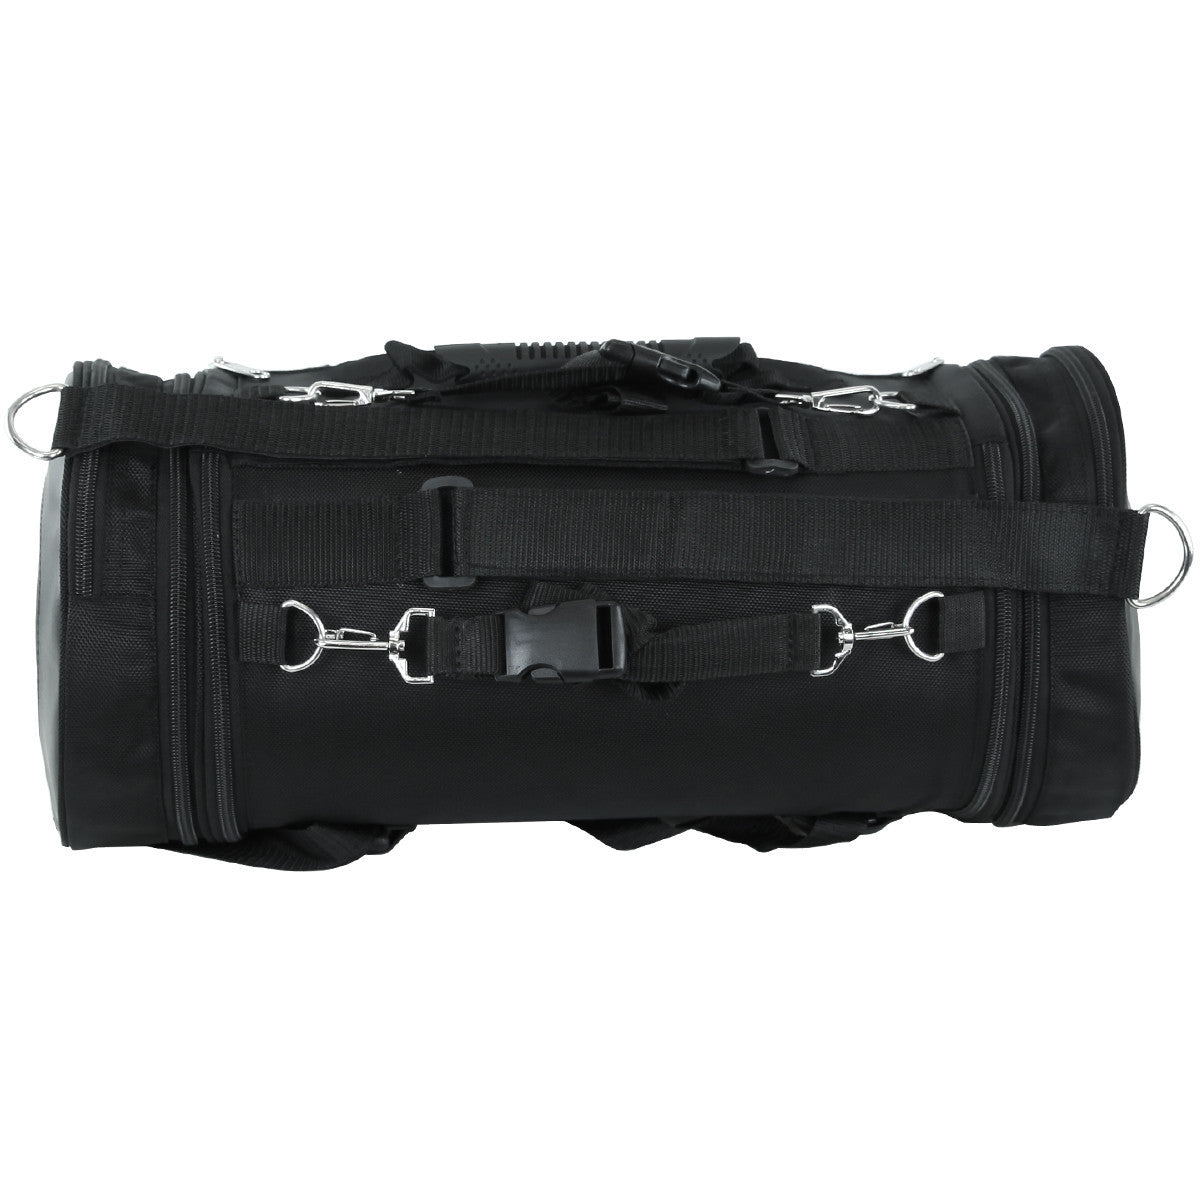 VS380 Expandable Roll Bag with Faux Leather Trim - Daytona Bikers Wear